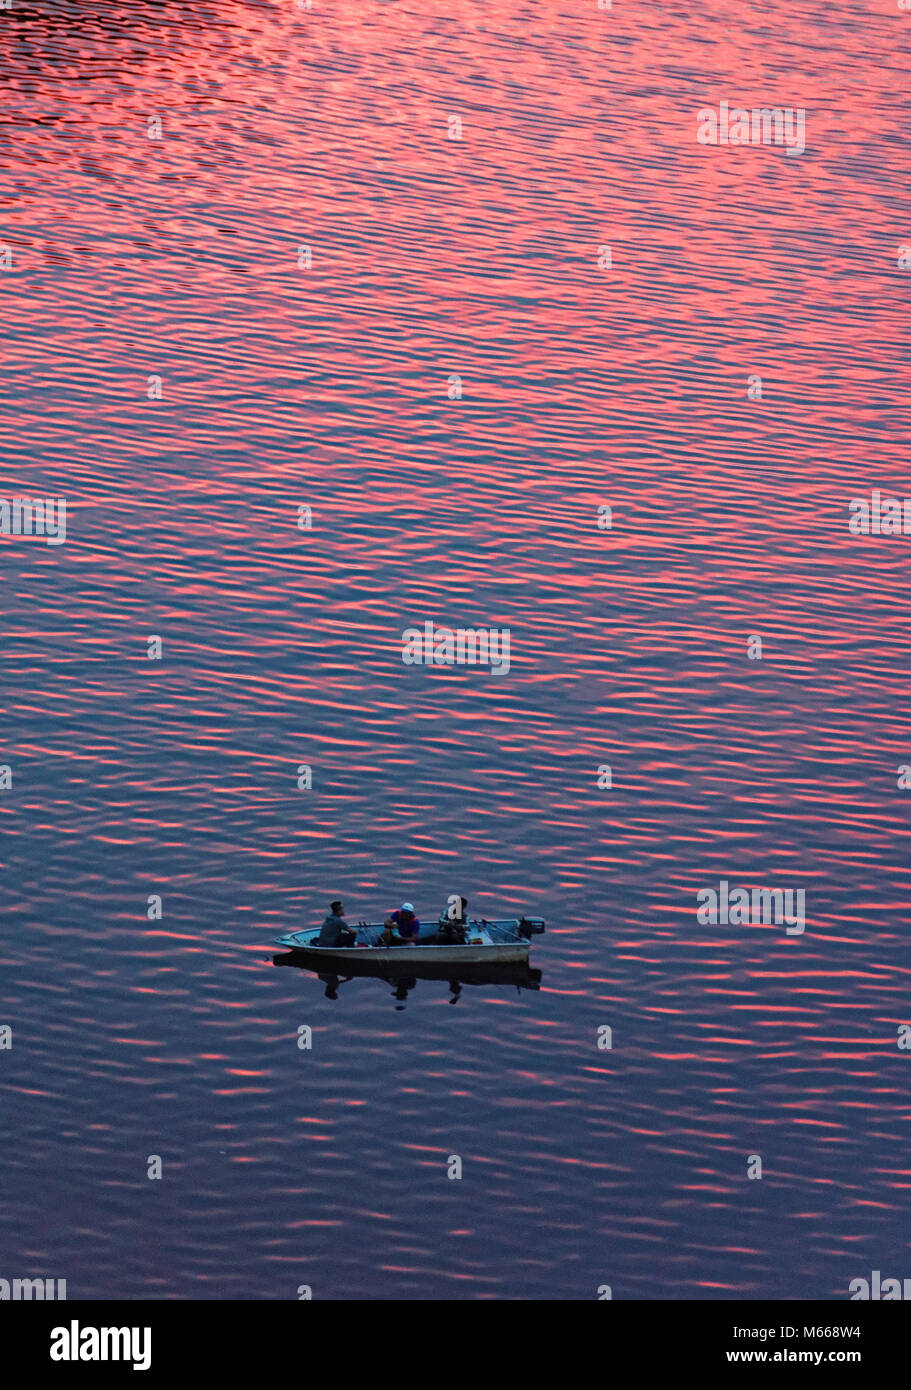 Three men fishing on the Sarawak River in Kuching as the sunset makes the water look red Stock Photo